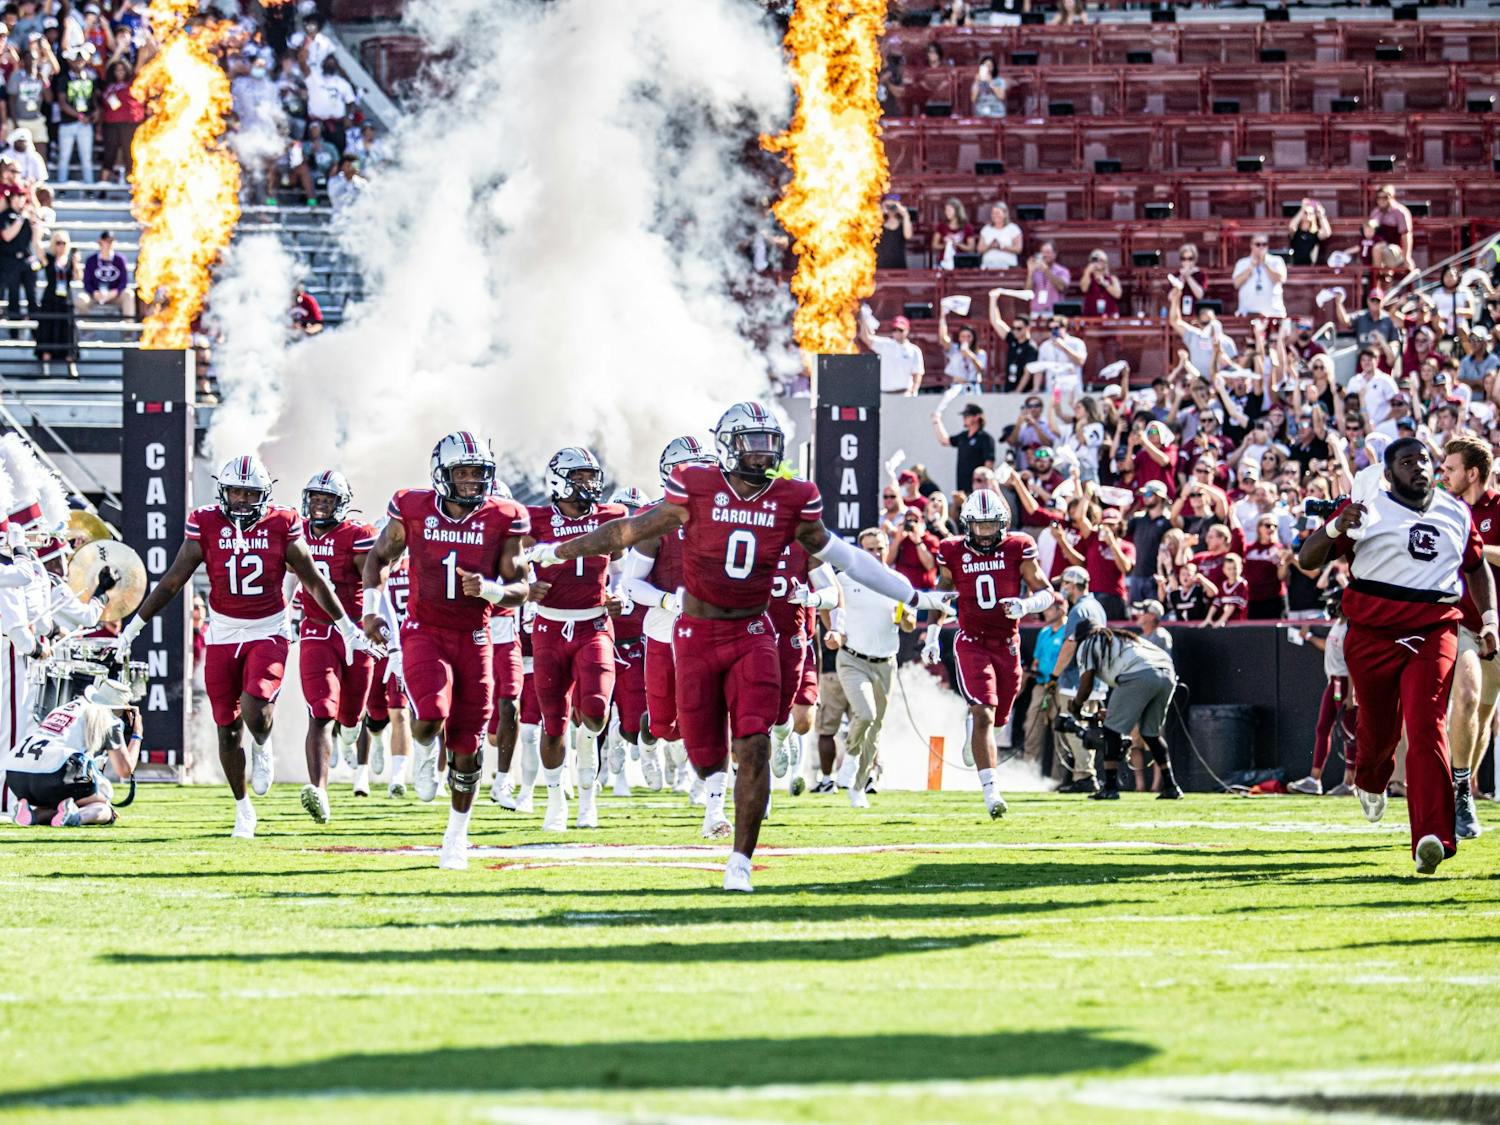 The Gamecock football team rushing the field for kick off at the Troy Football game Oct. 2, 2021, at Williams-Brice Stadium.&nbsp;